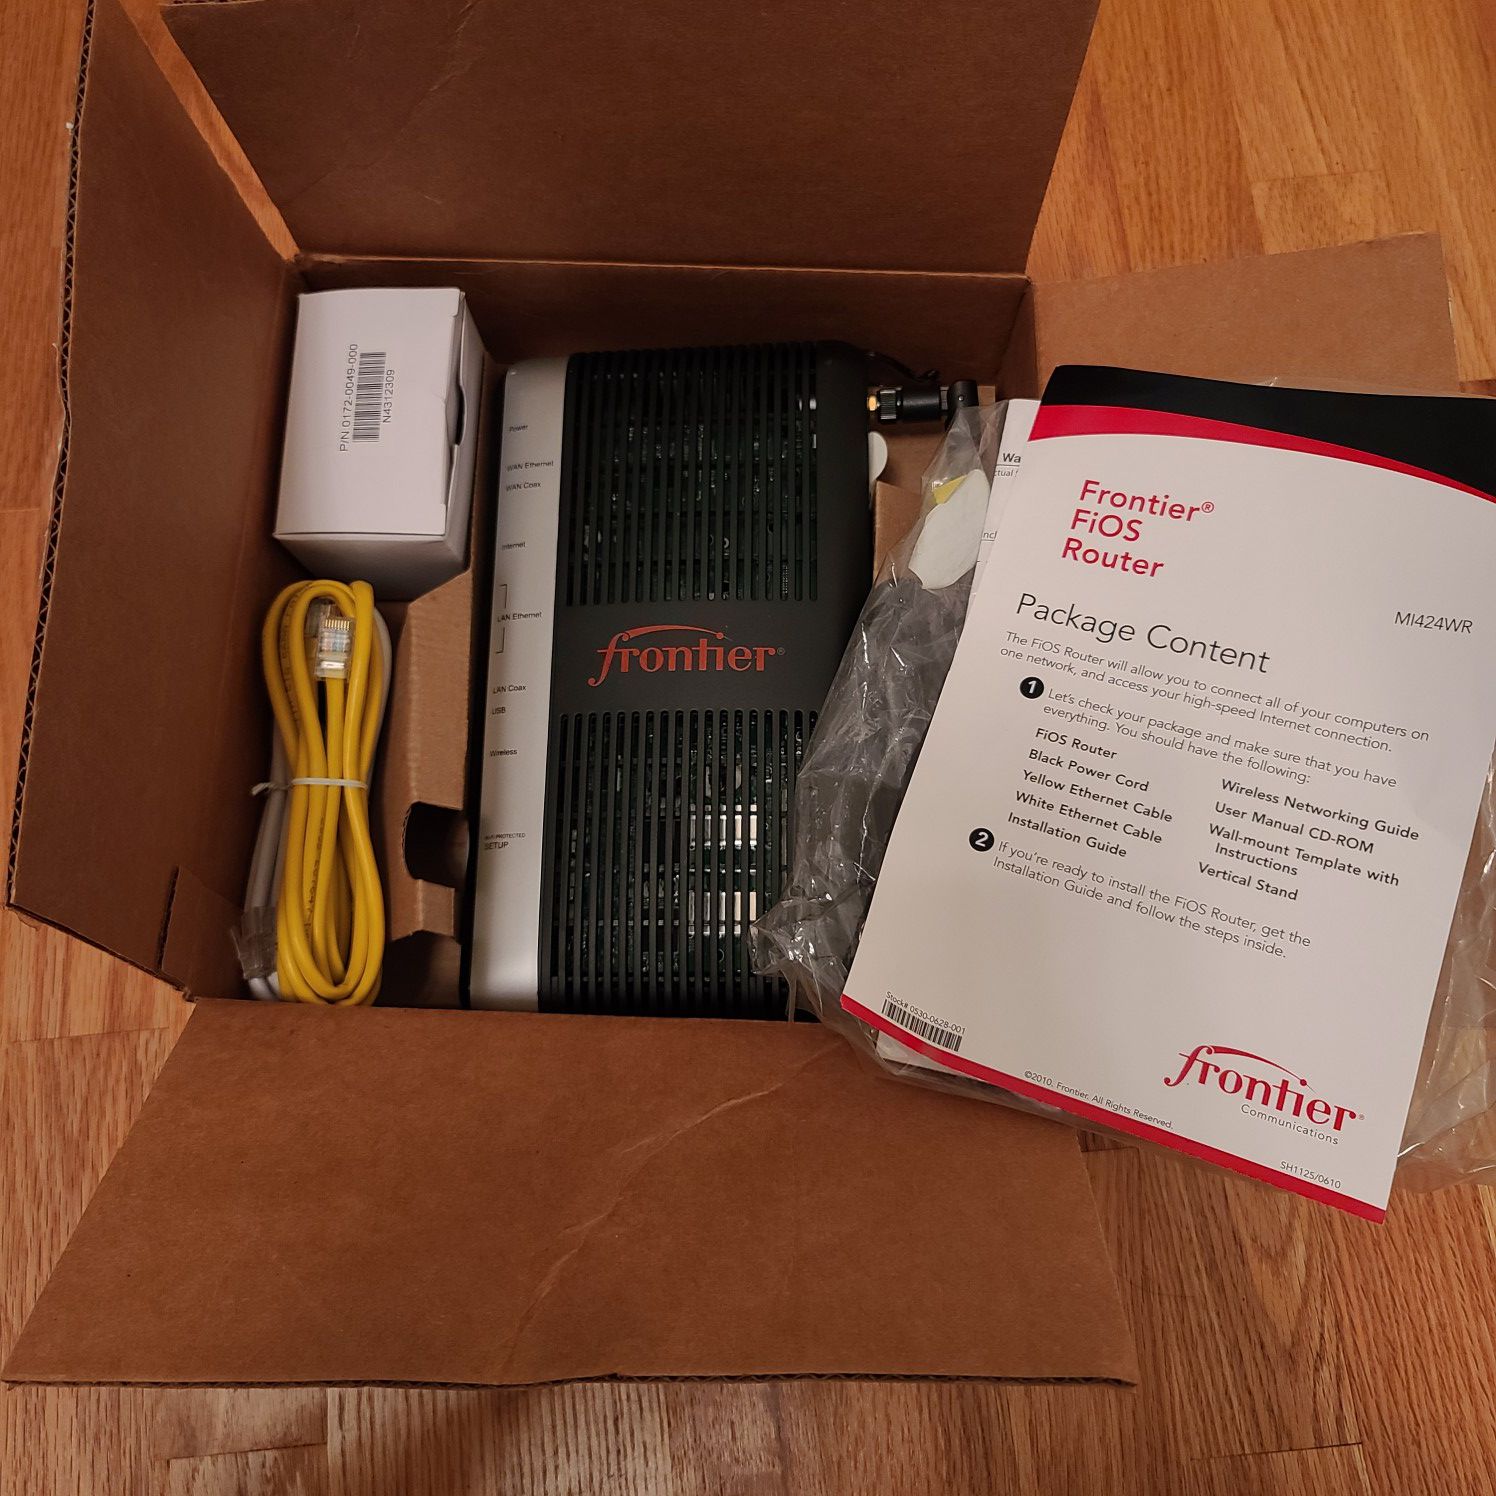 FiOS Router for WiFi | Home Router Kit